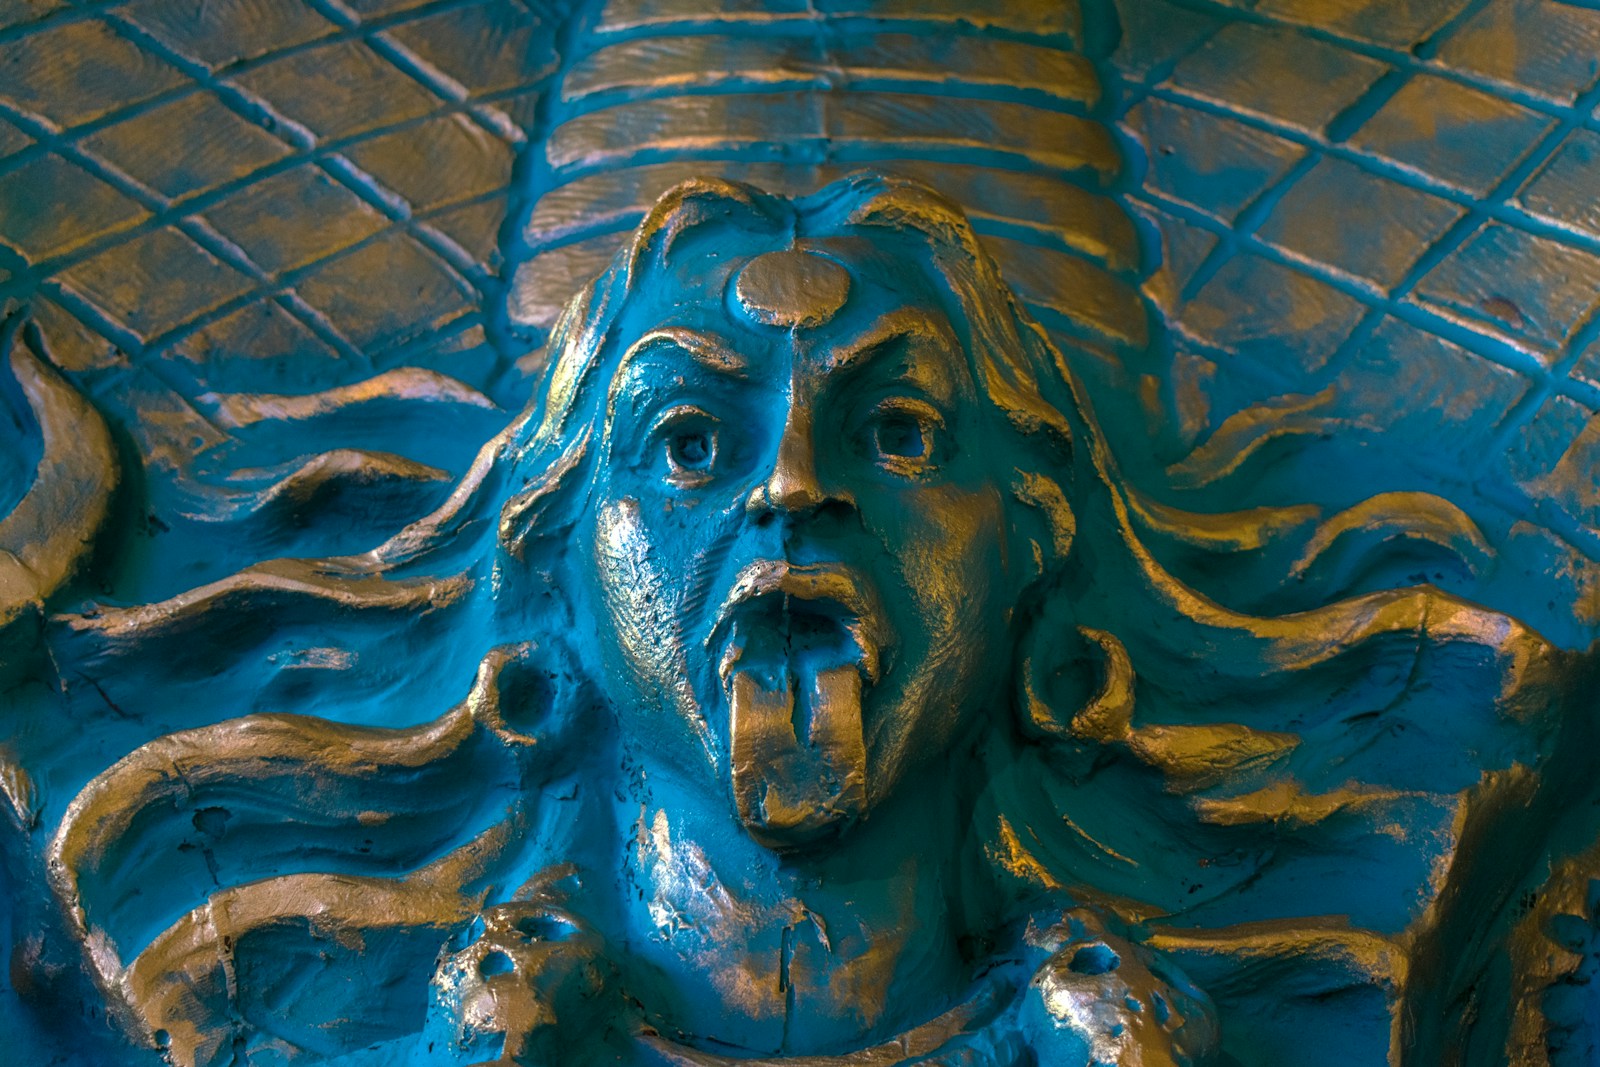 a close up of a statue of a person with a hat